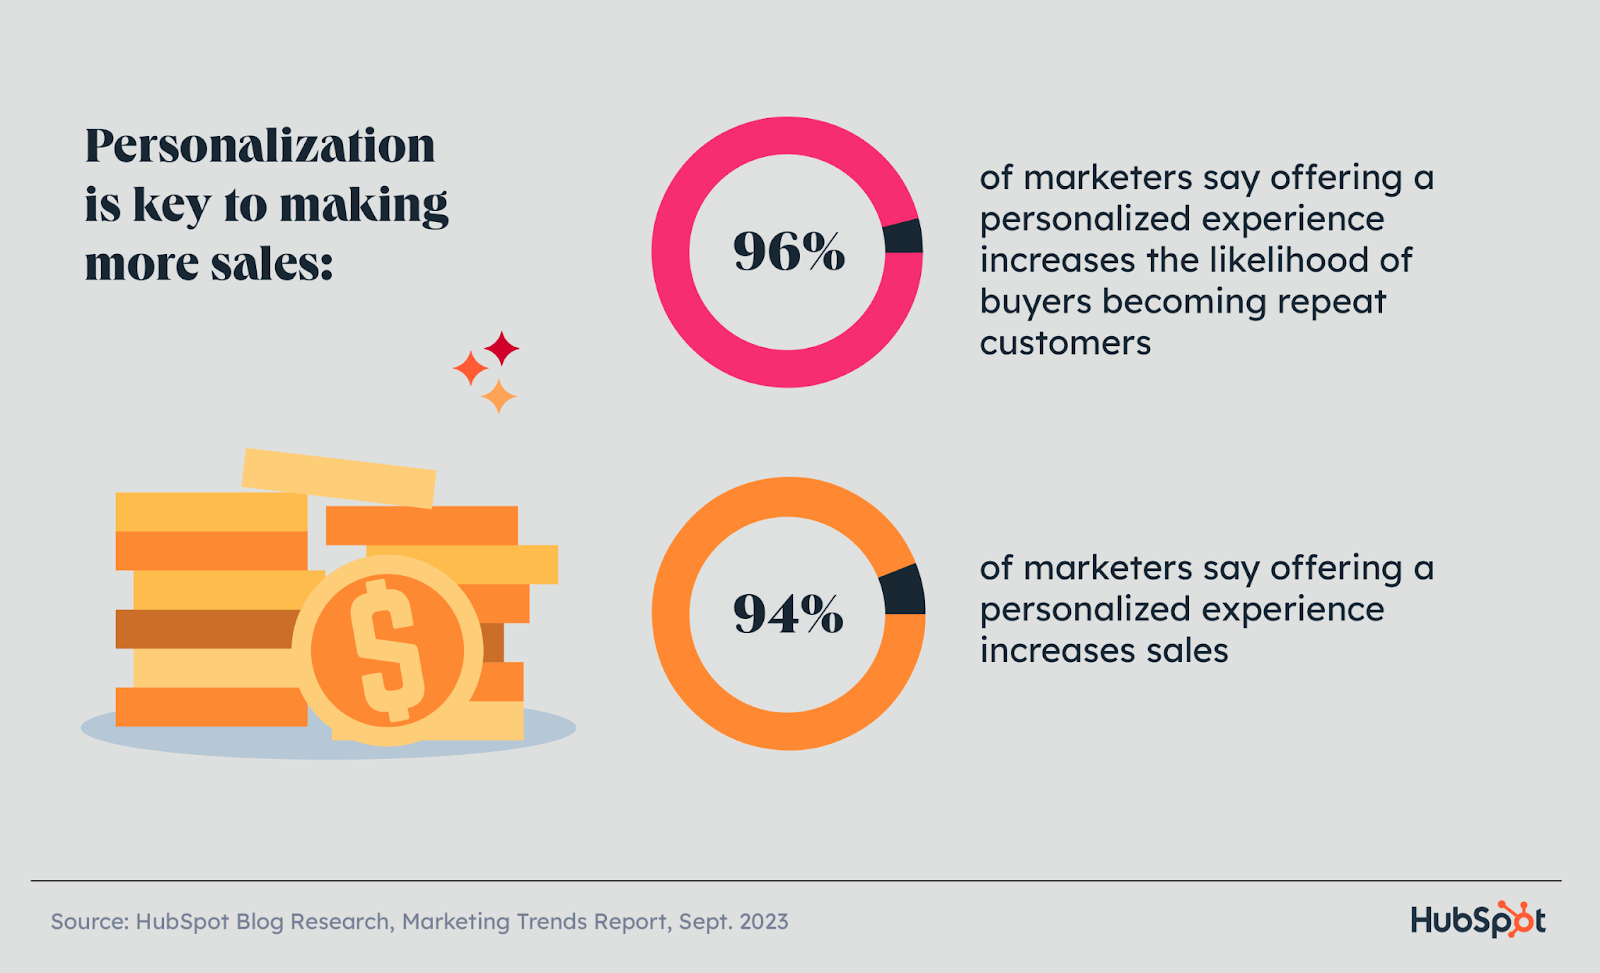 pie chart showing the impact of personalization on sales